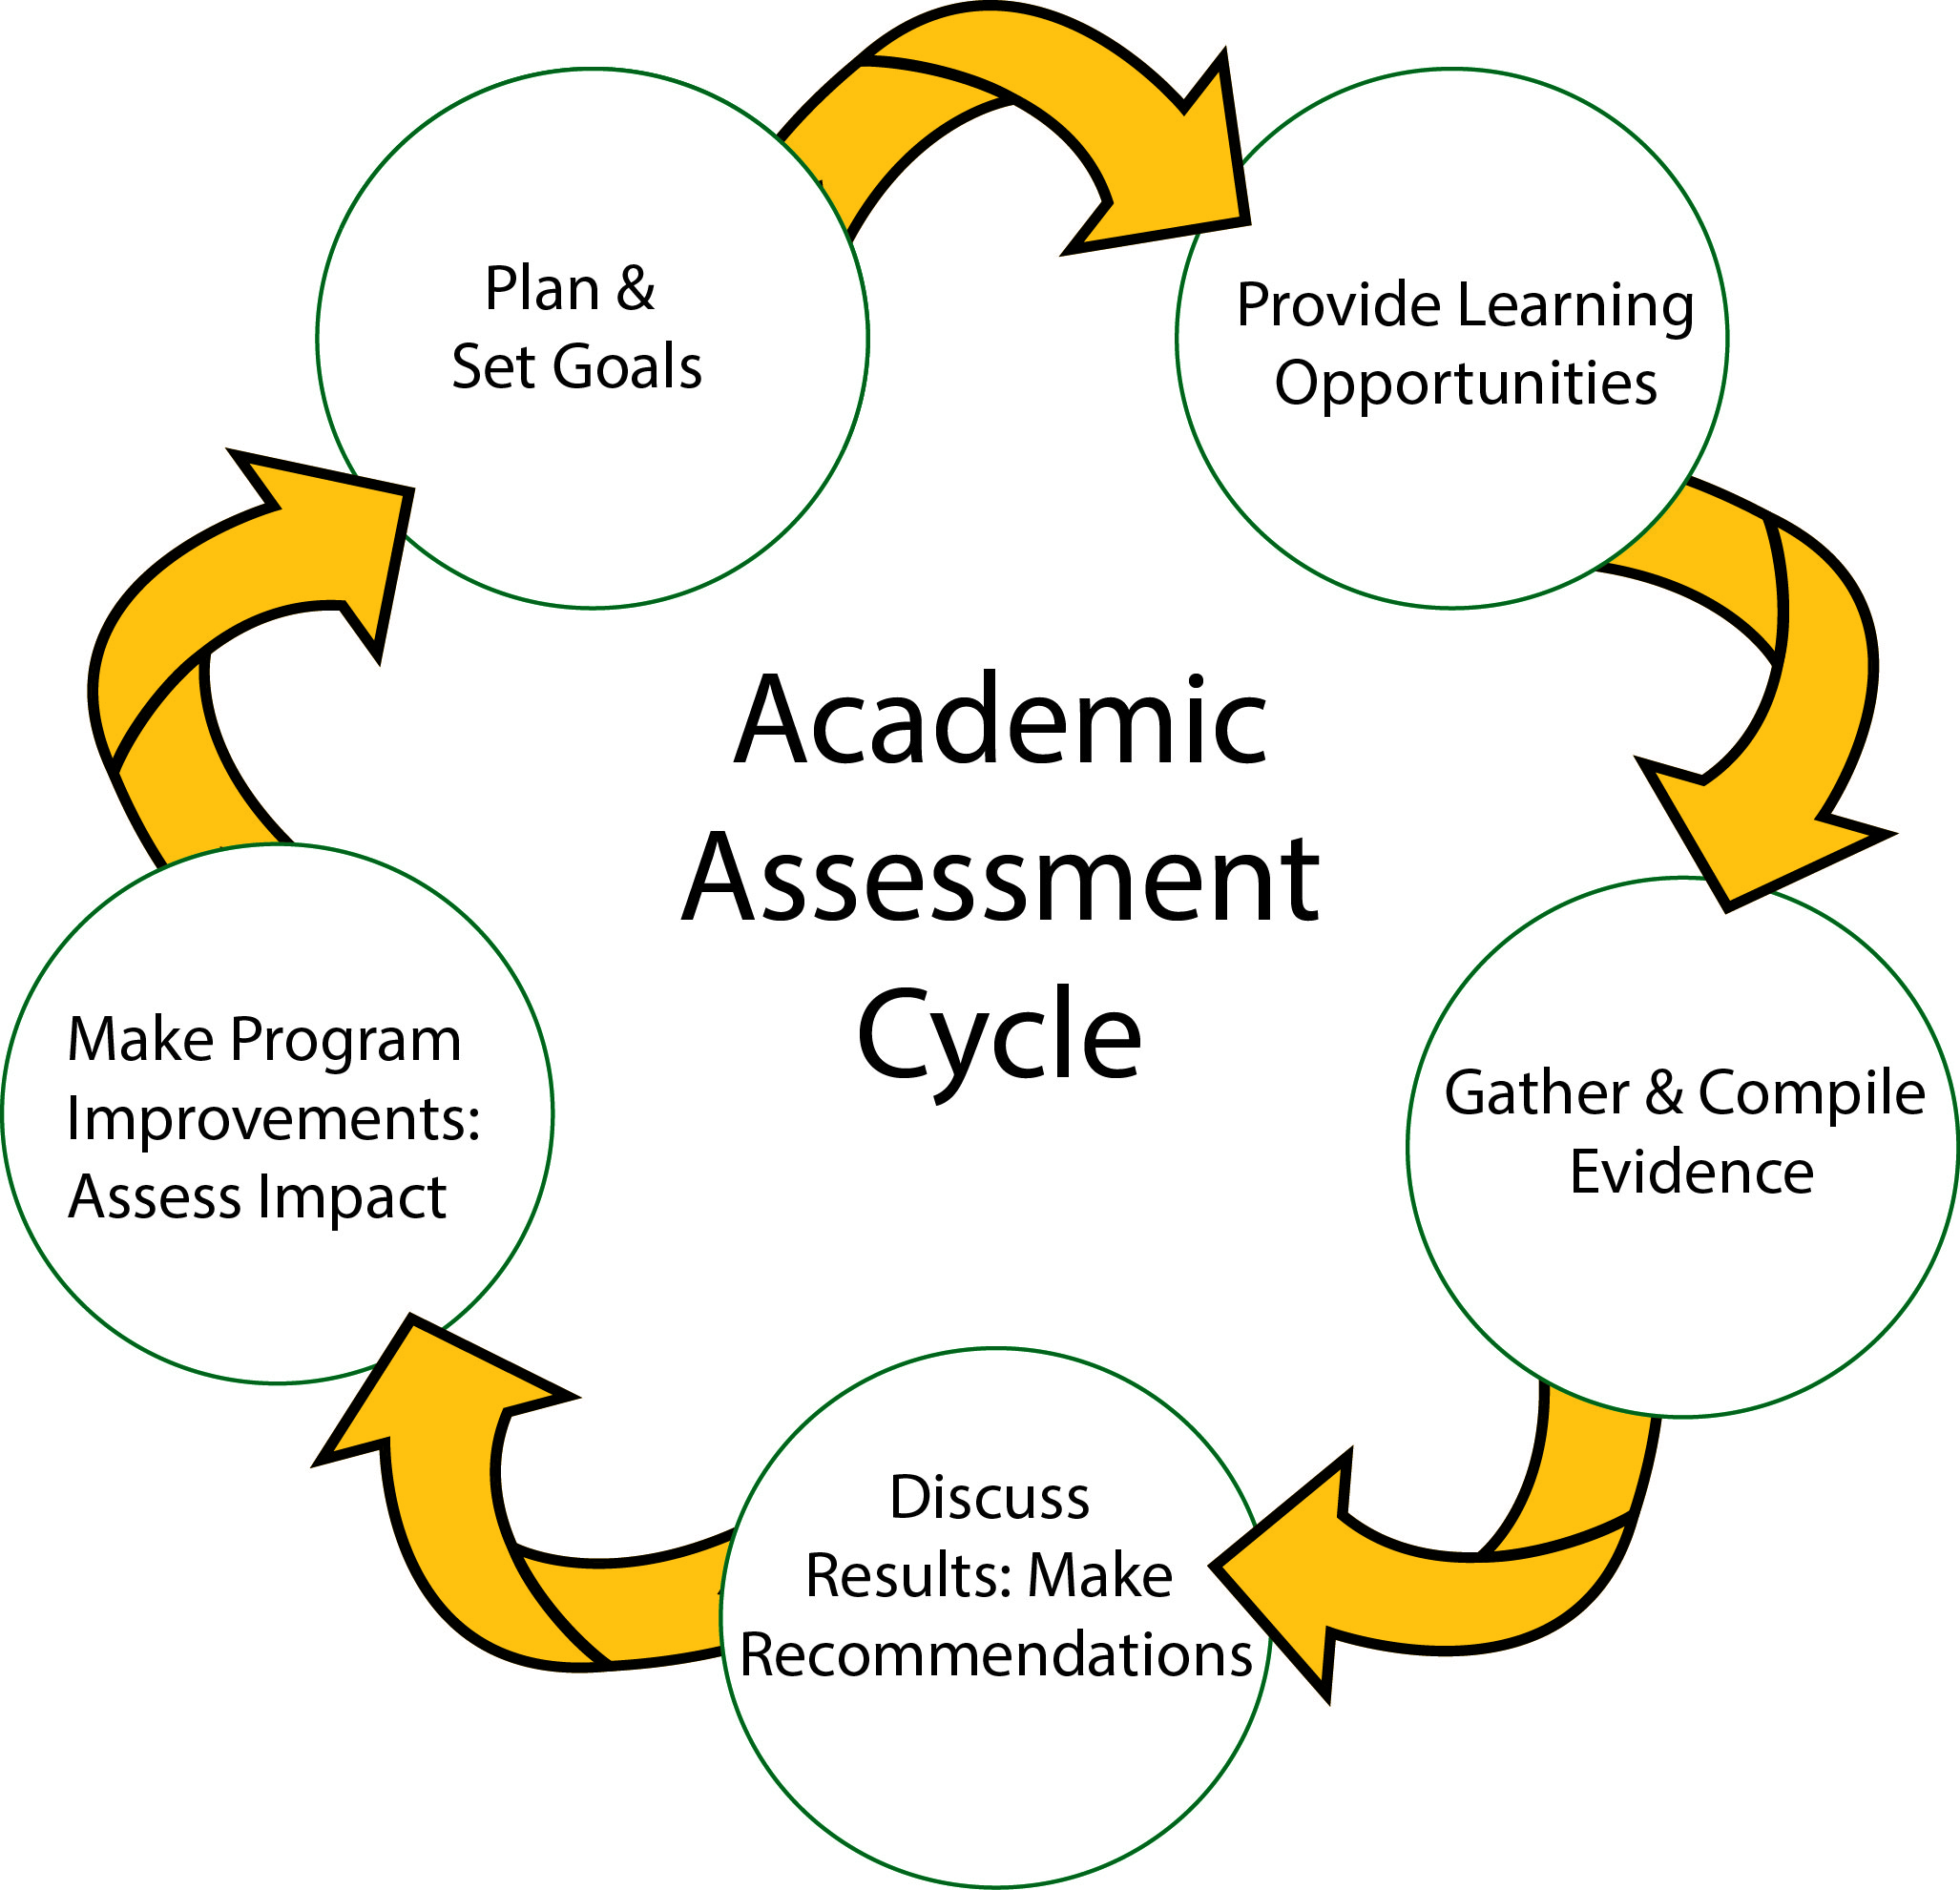 Academic Assessment Cycle: Plan & Set Goals; Provide Learning Opportunities; Gather & Compile Evidence; Discuss Results: Make Recommendations; Make Program Improvements: Assess Impact; Plan & Set Goals